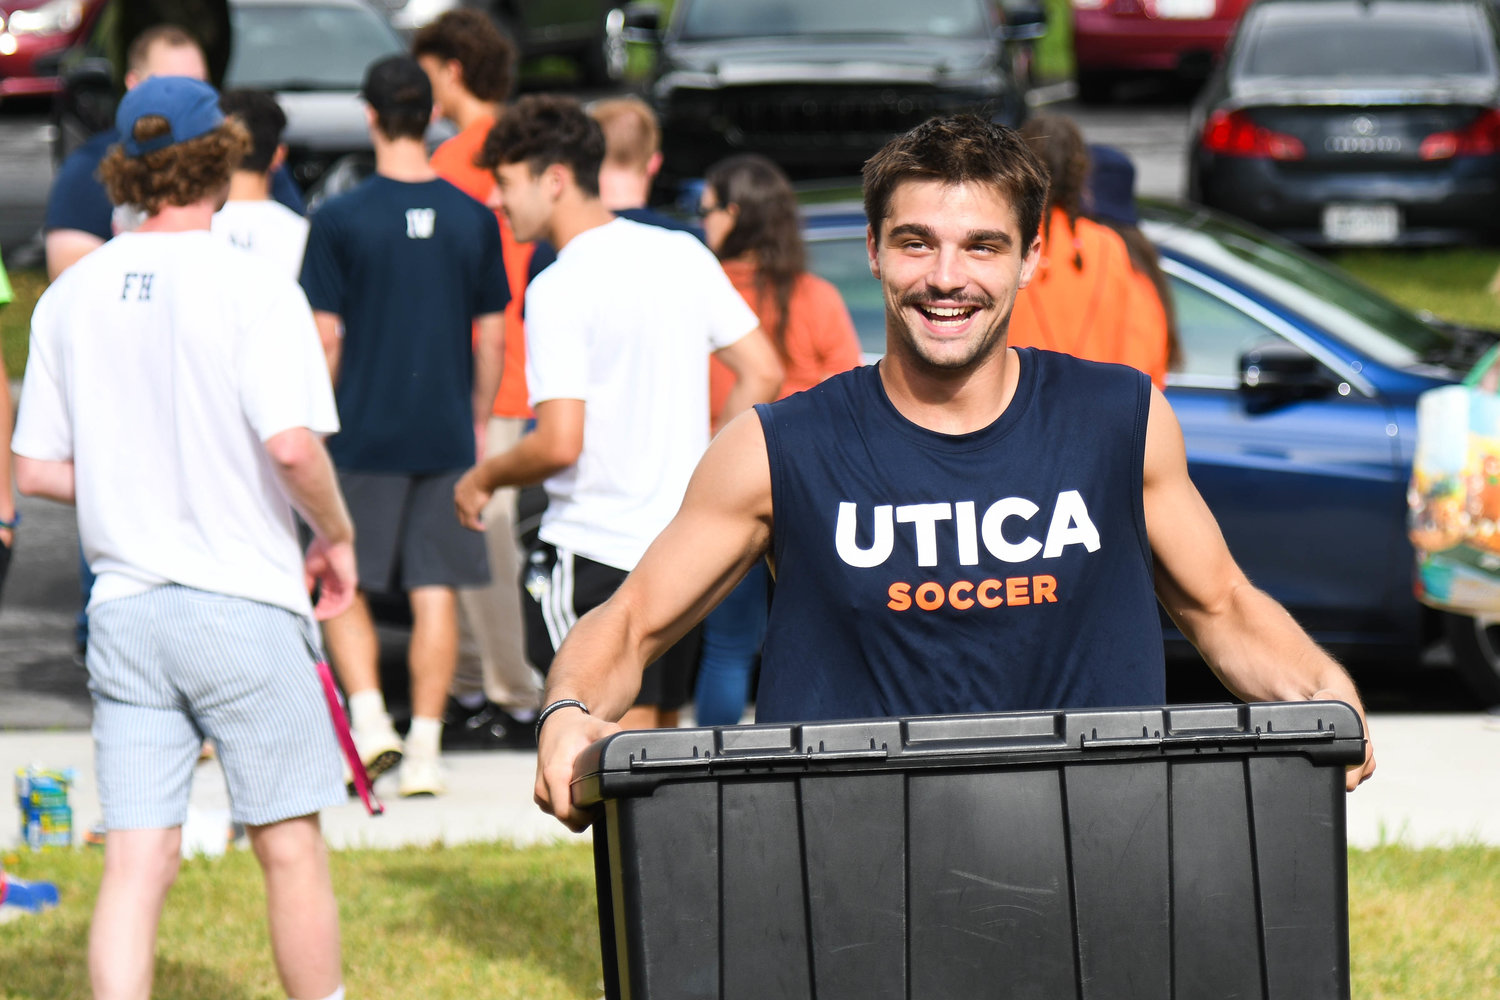 Nico Leonard and other members of the Utica University soccer team help freshman move into their dorms on Tuesday.